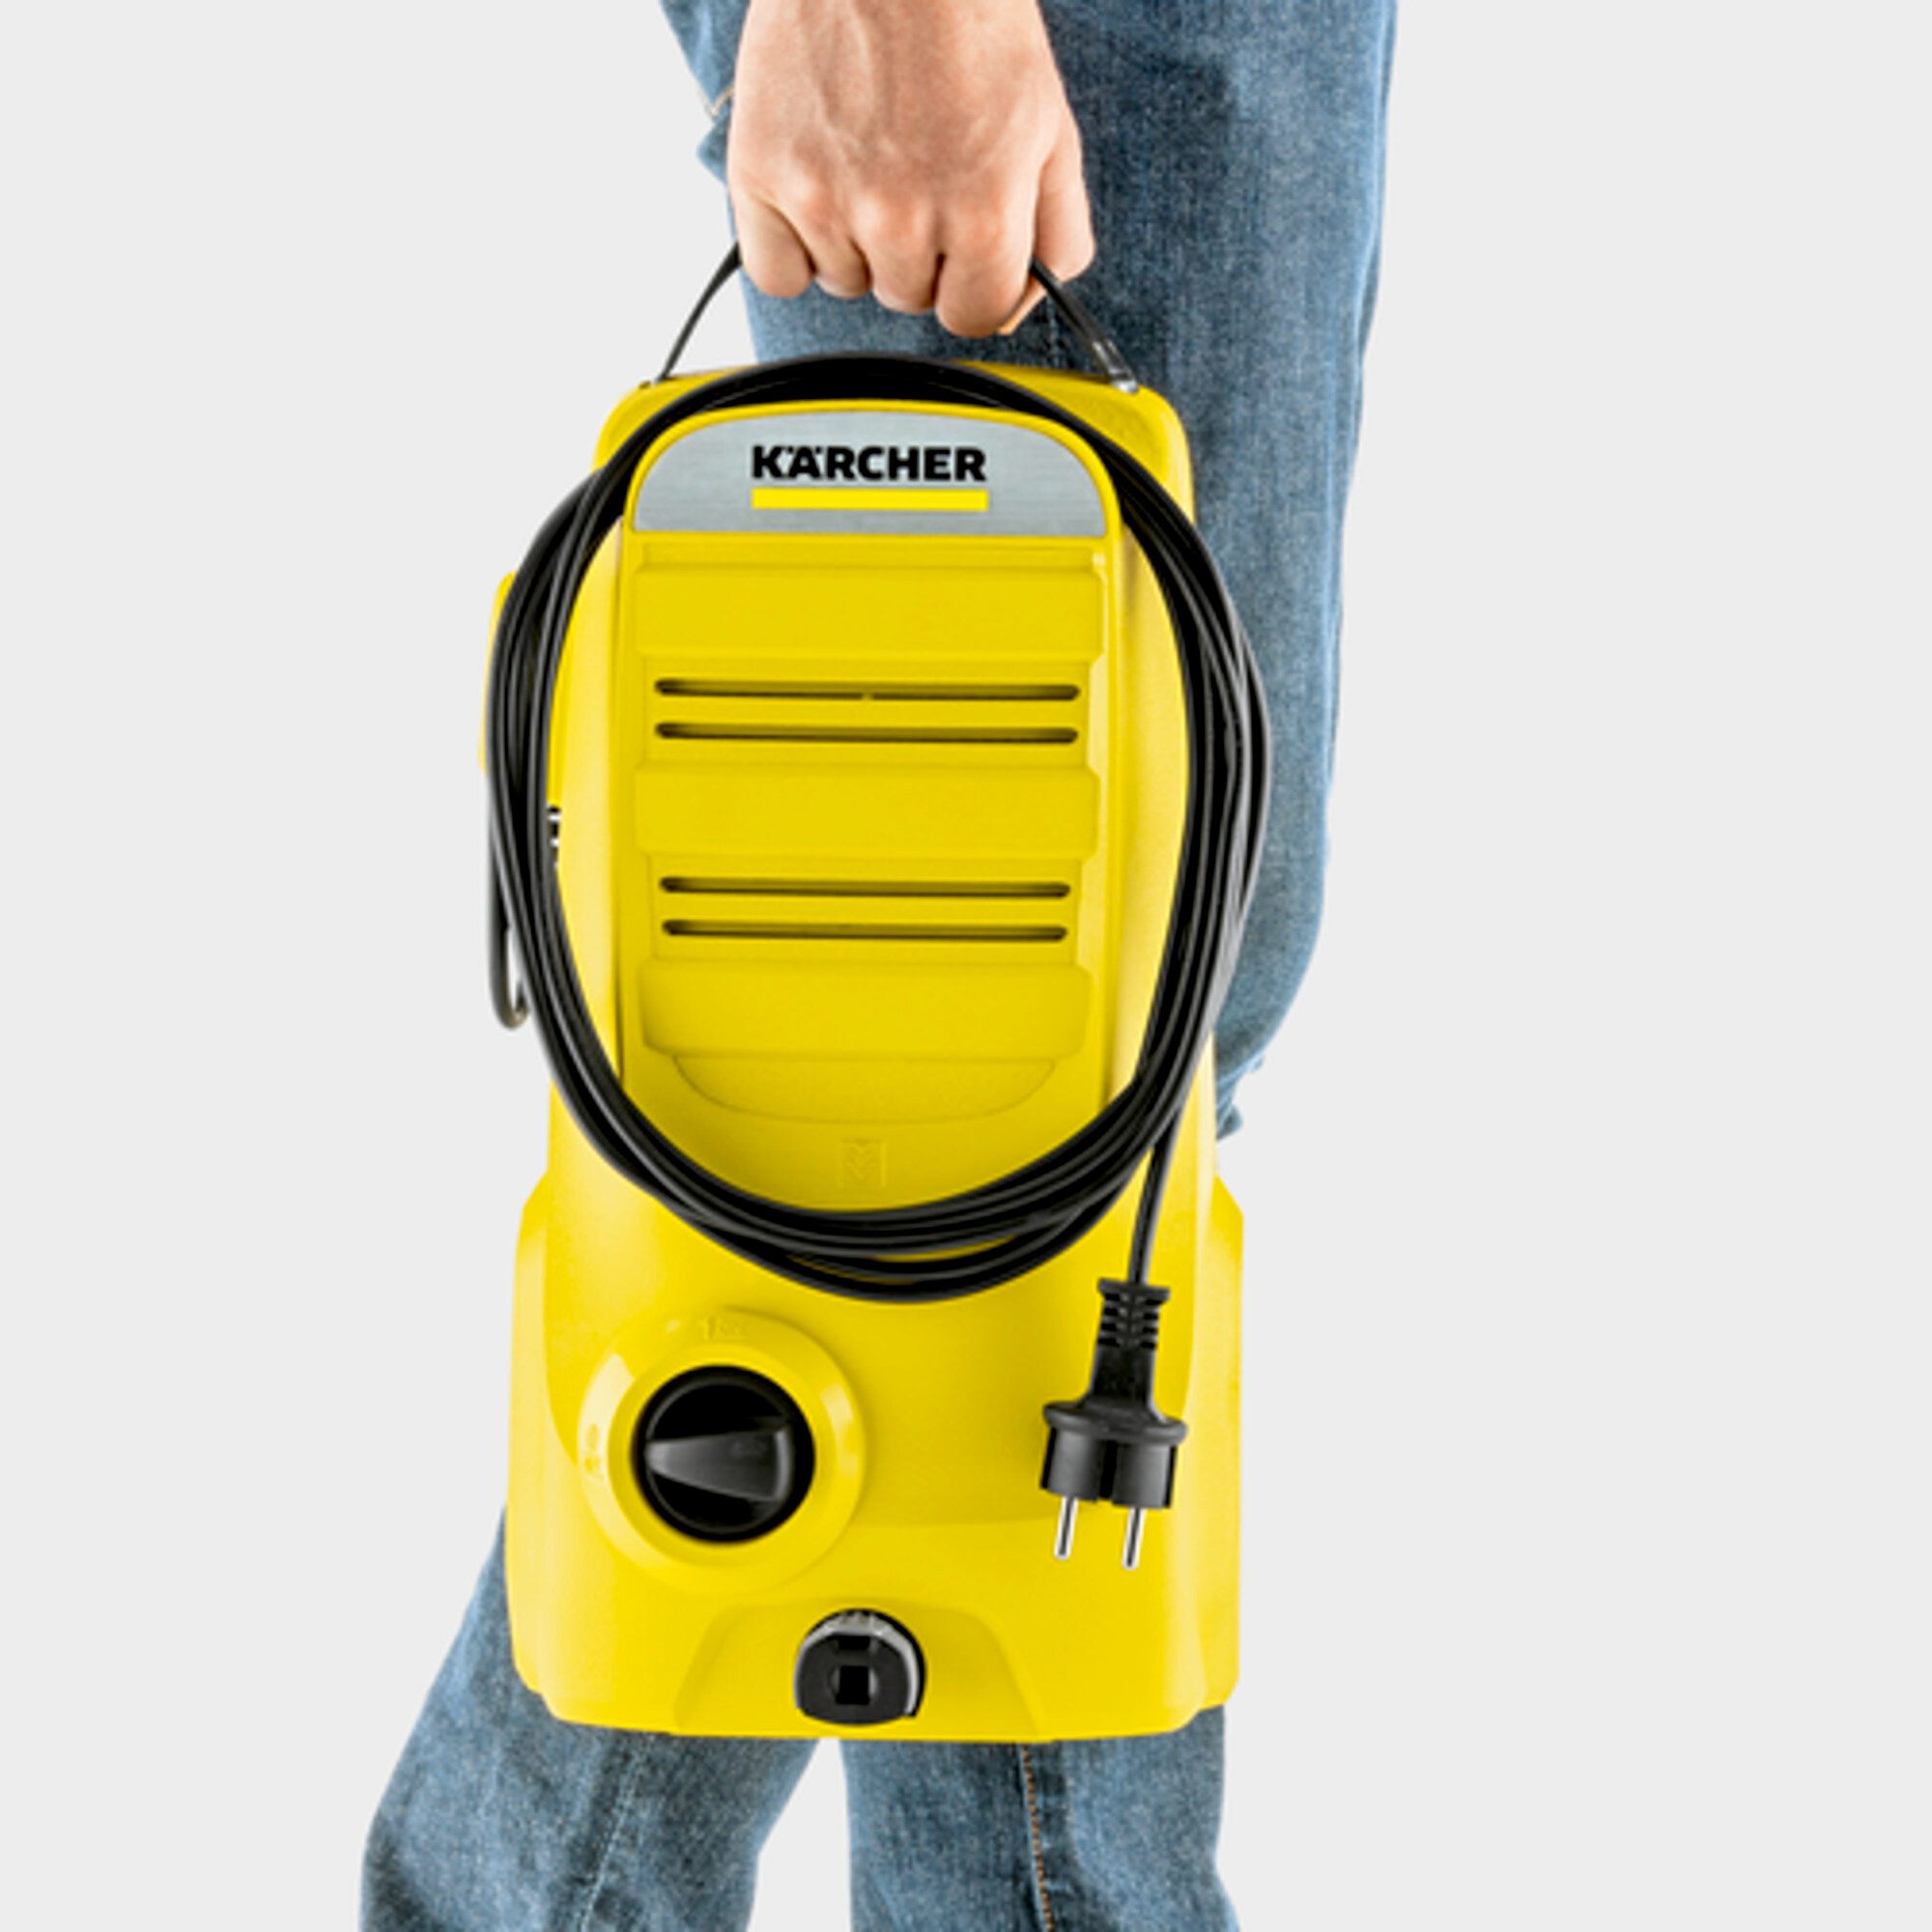 pressure washer K 2 Compact: Sits comfortably in the hand